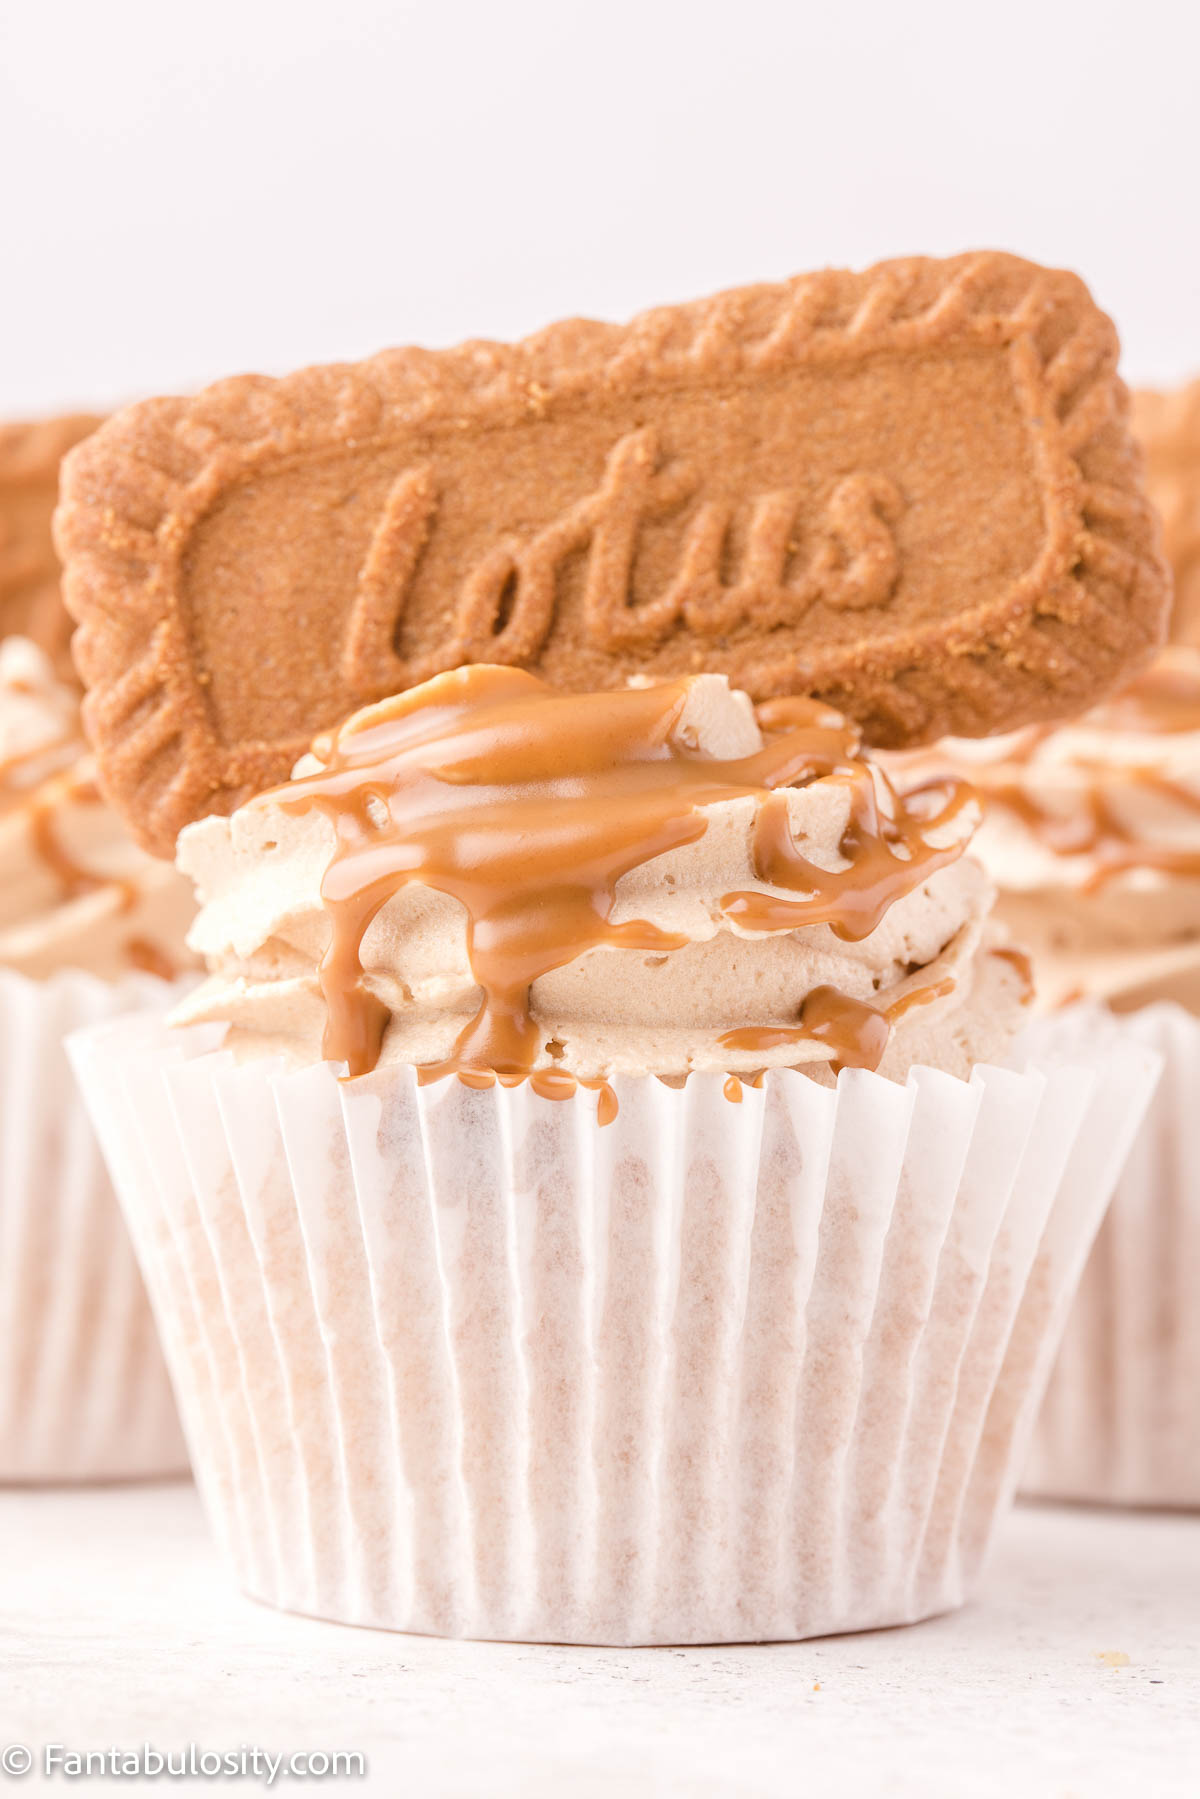 A frosted cupcake topped with buttercream, a drizzle of Biscoff spread and a Biscoff cookie is centered with additional cupcakes visible in the background